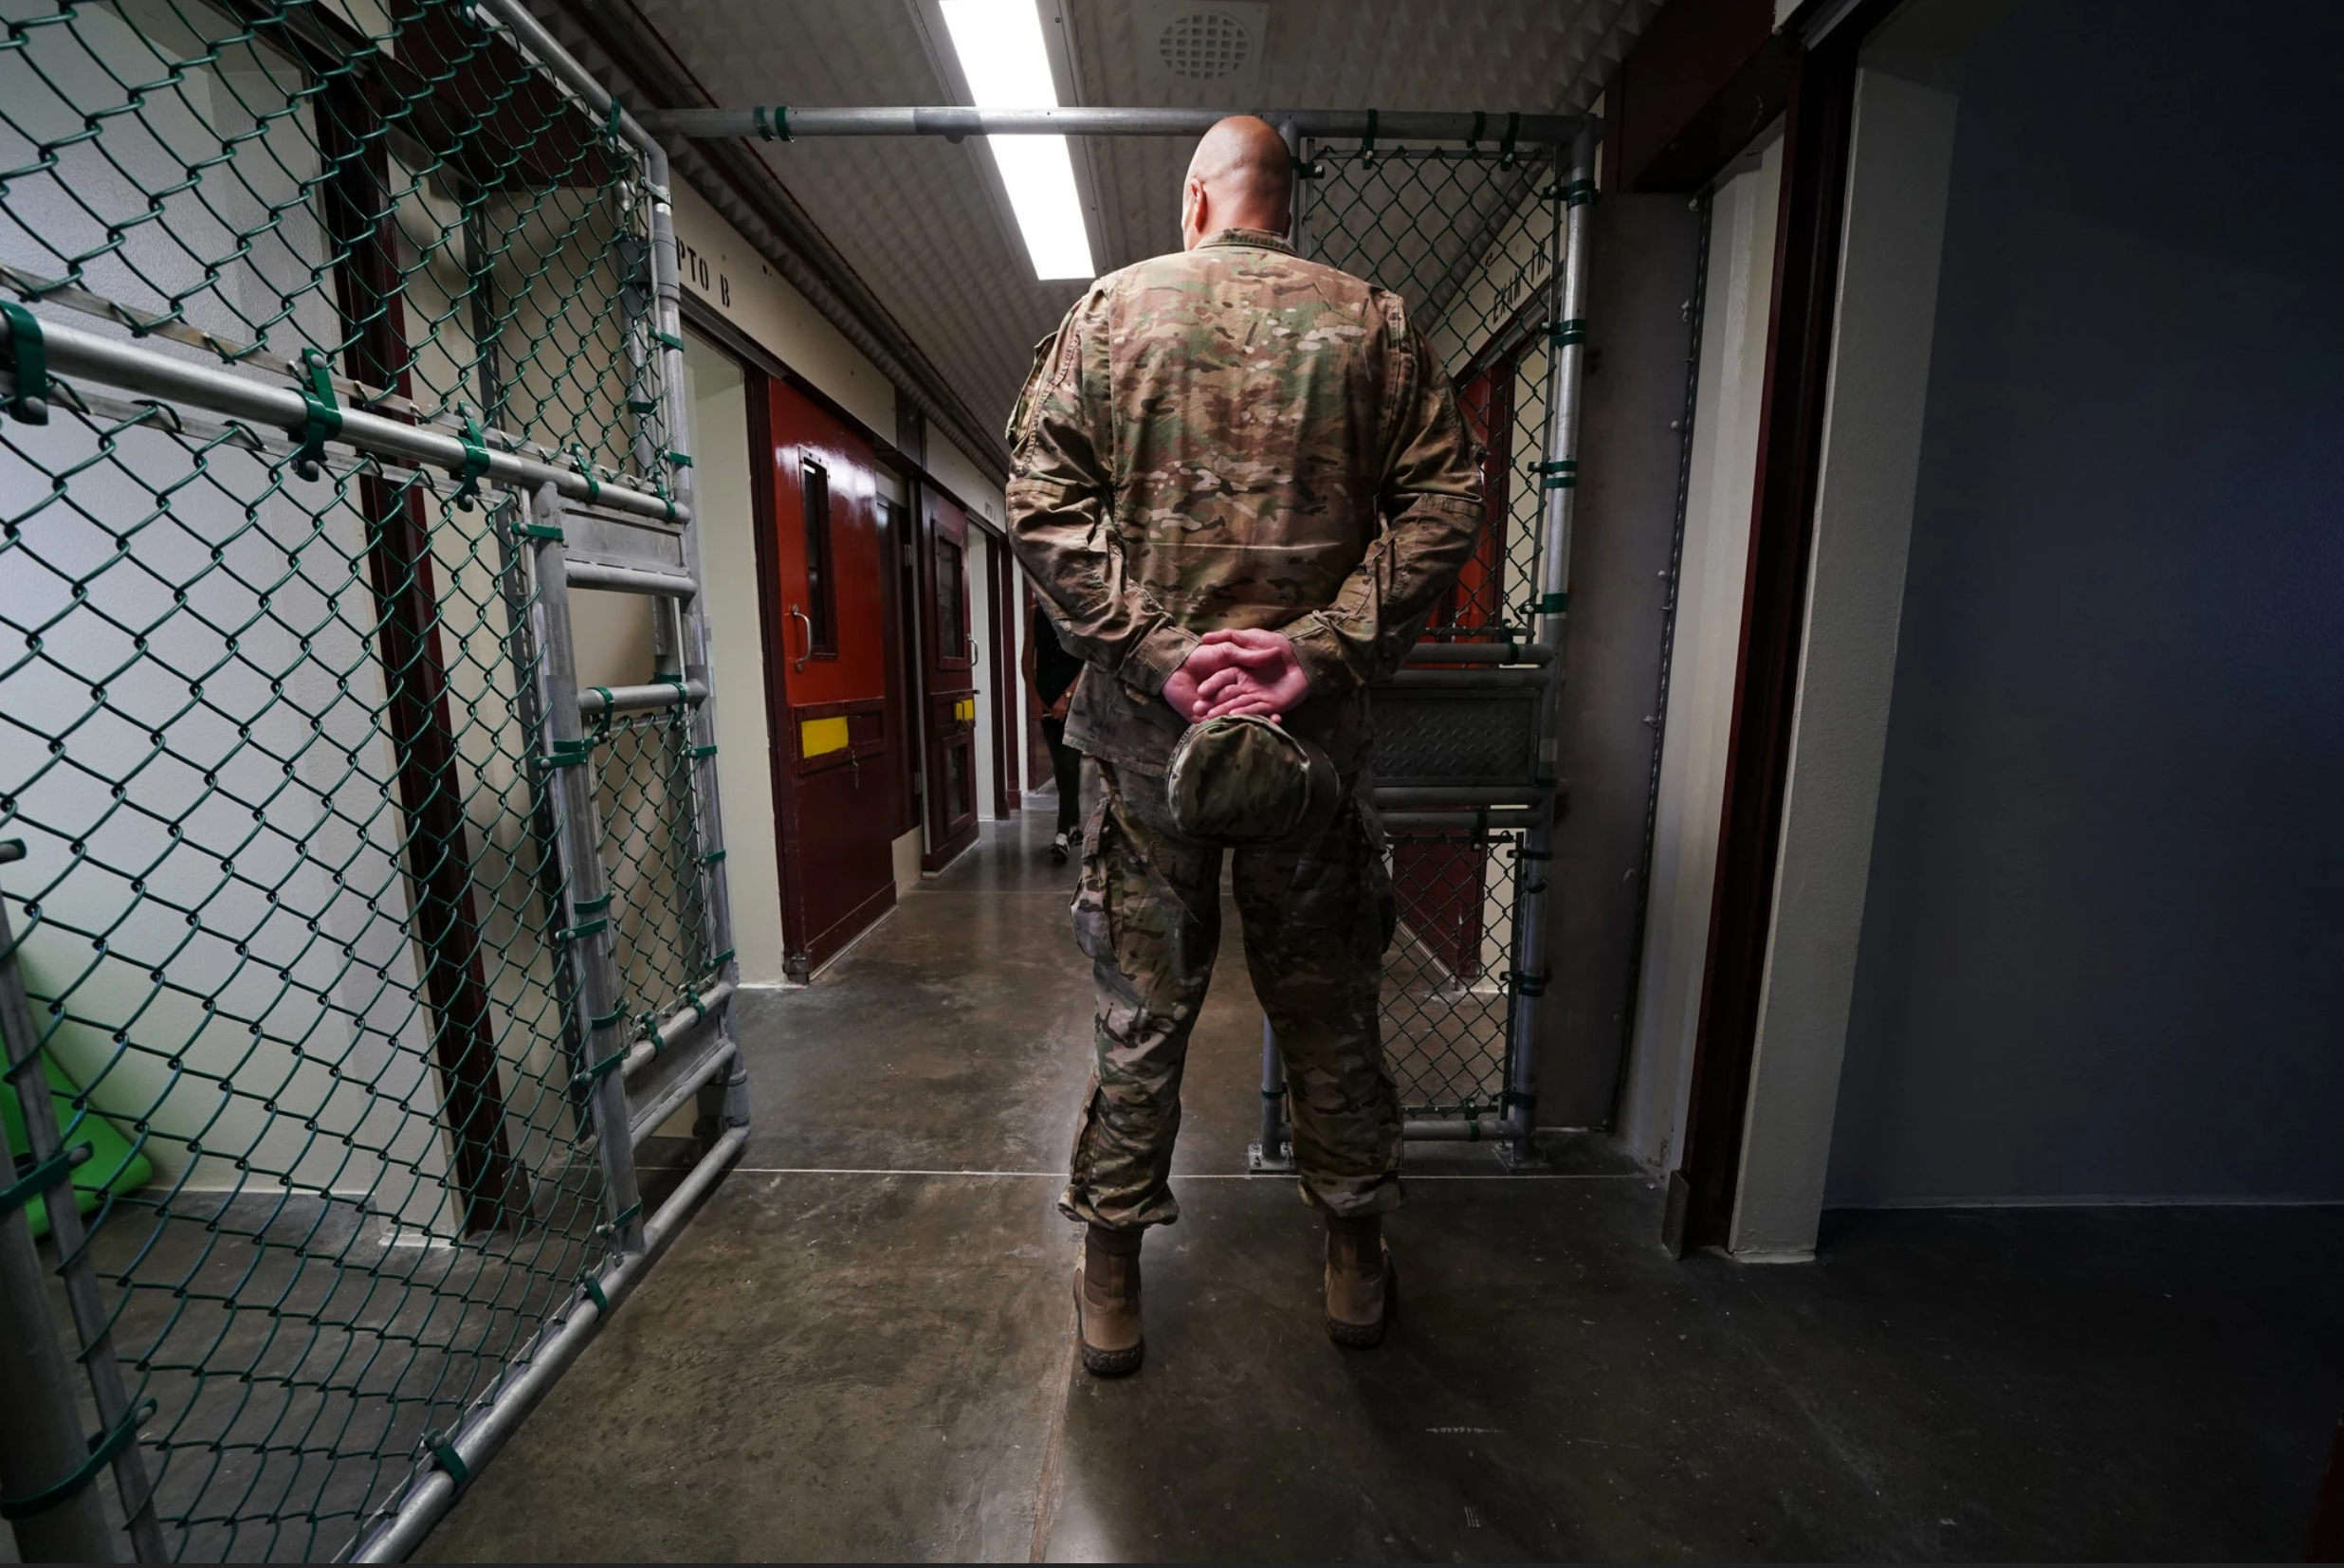 A member of the military at Guantanamo Bay’s detention center. For most of two decades, the United States has been holding five men accused of helping plot the September 11, 2001 attacks. Image by Doug Mills for The New York Times. United States, undated.